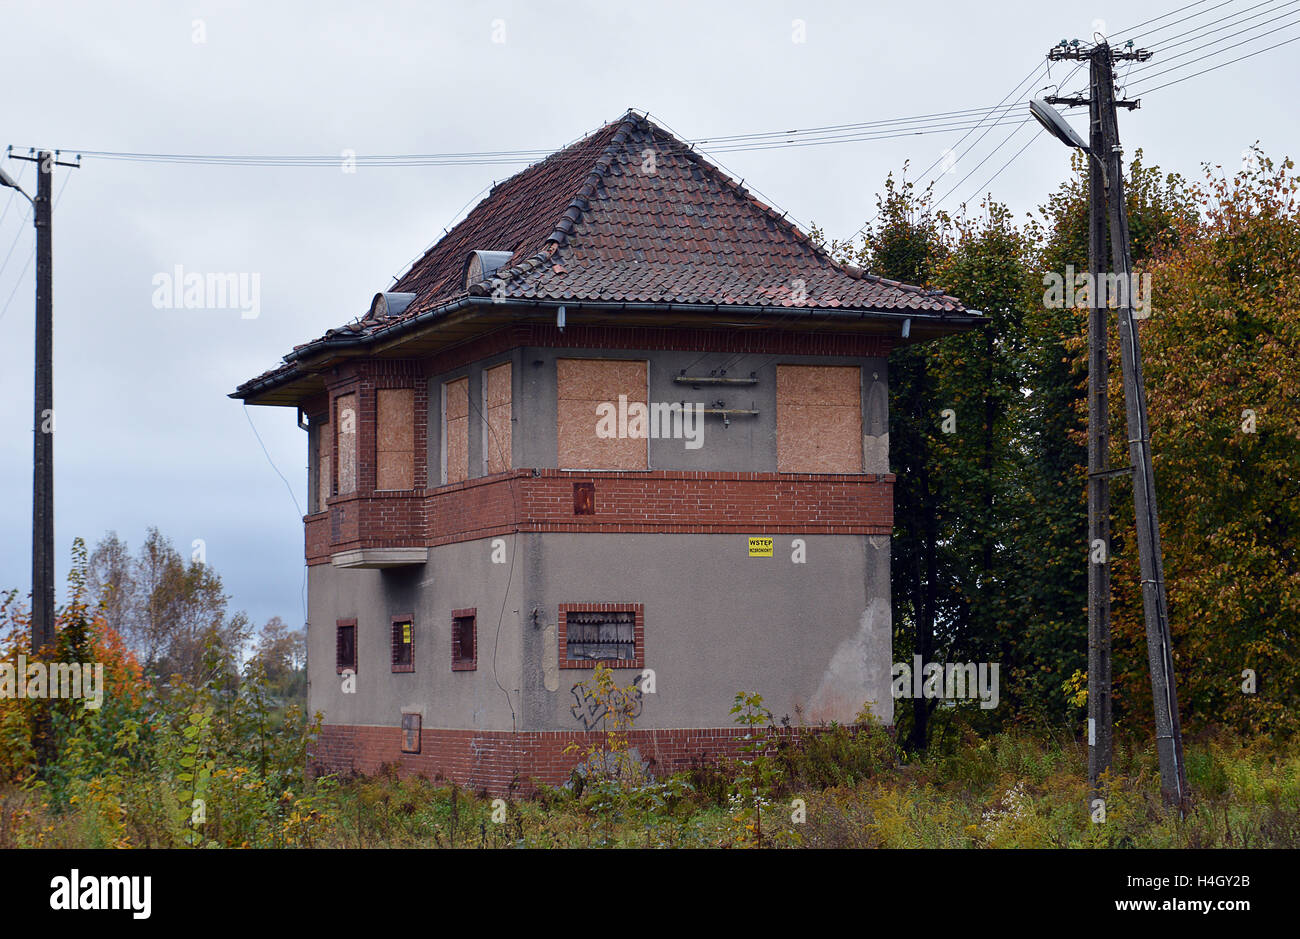 Gołdap, Poland - 7 October 2016: An abandoned railway signal box stands on the outskirts of Goldap. Stock Photo